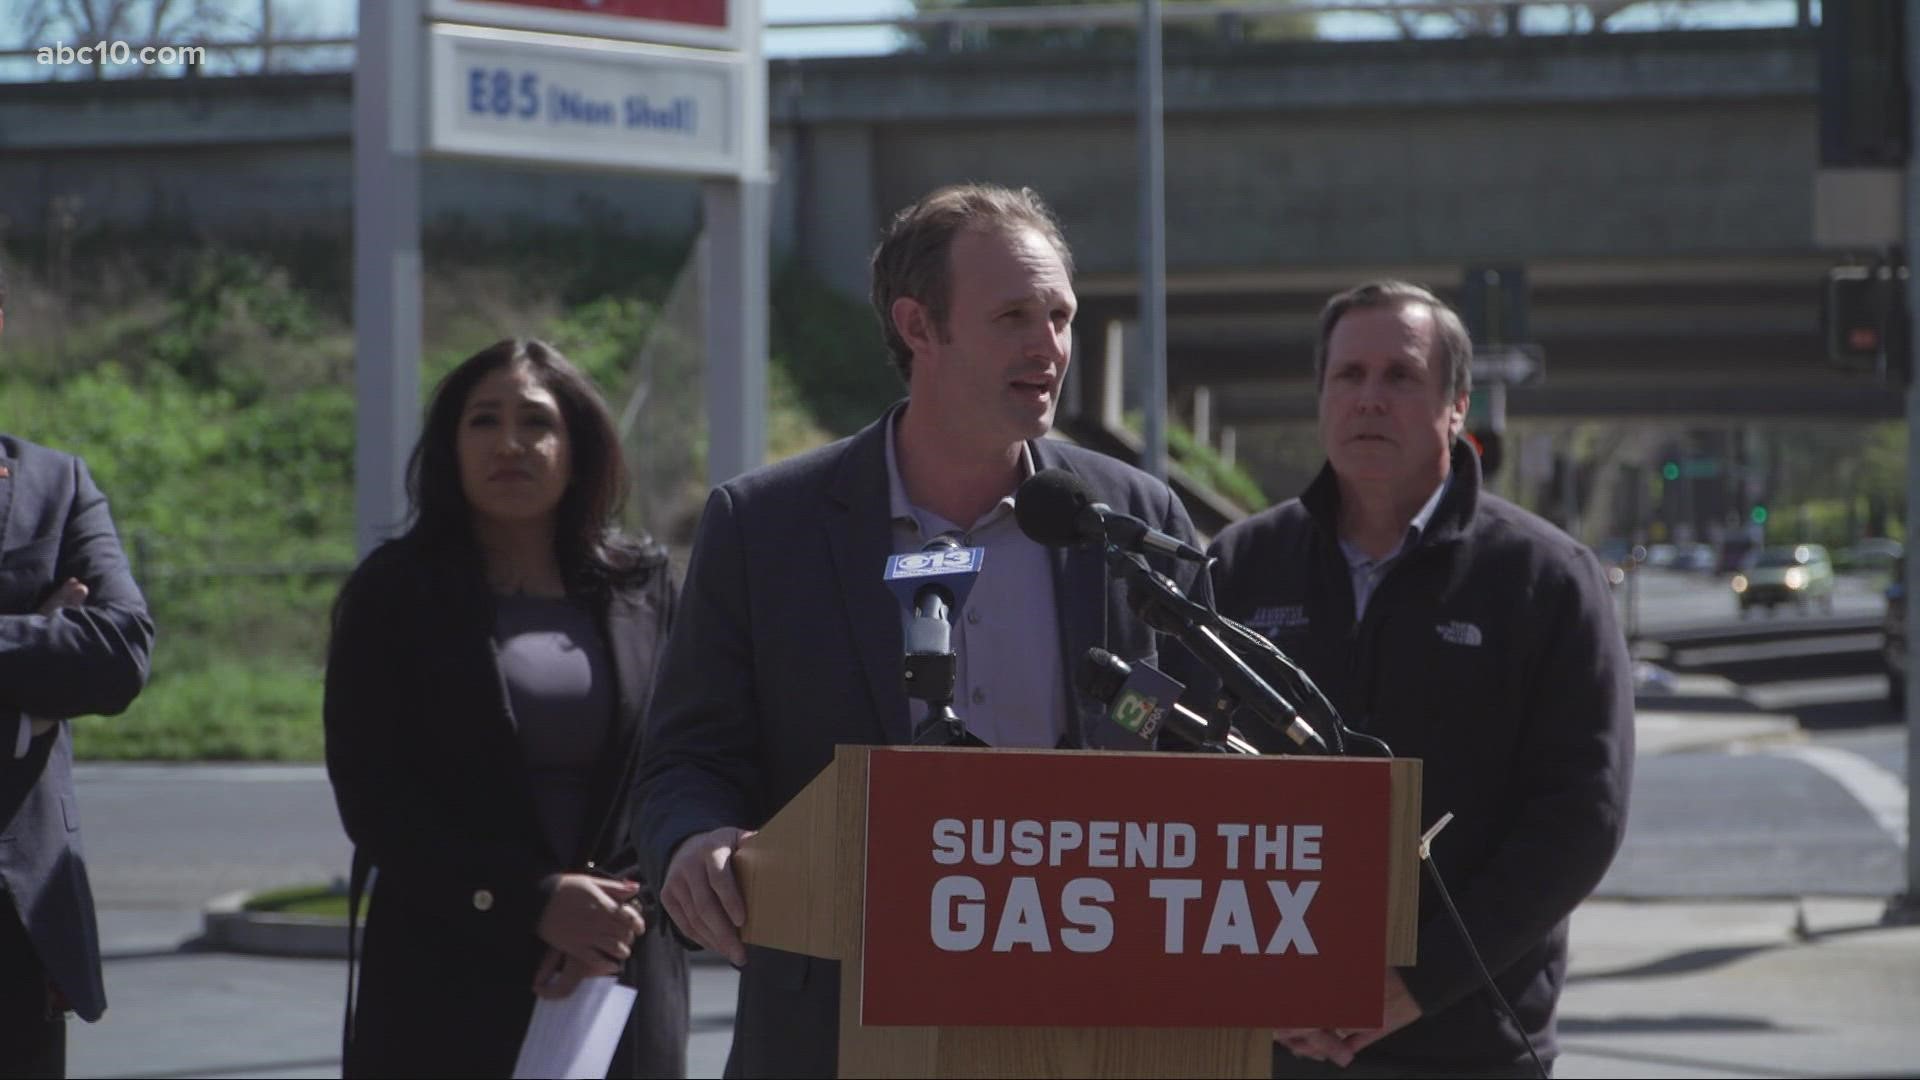 California Republican lawmakers did not get enough votes to suspend the rules to move forward with their gas tax holiday bill.